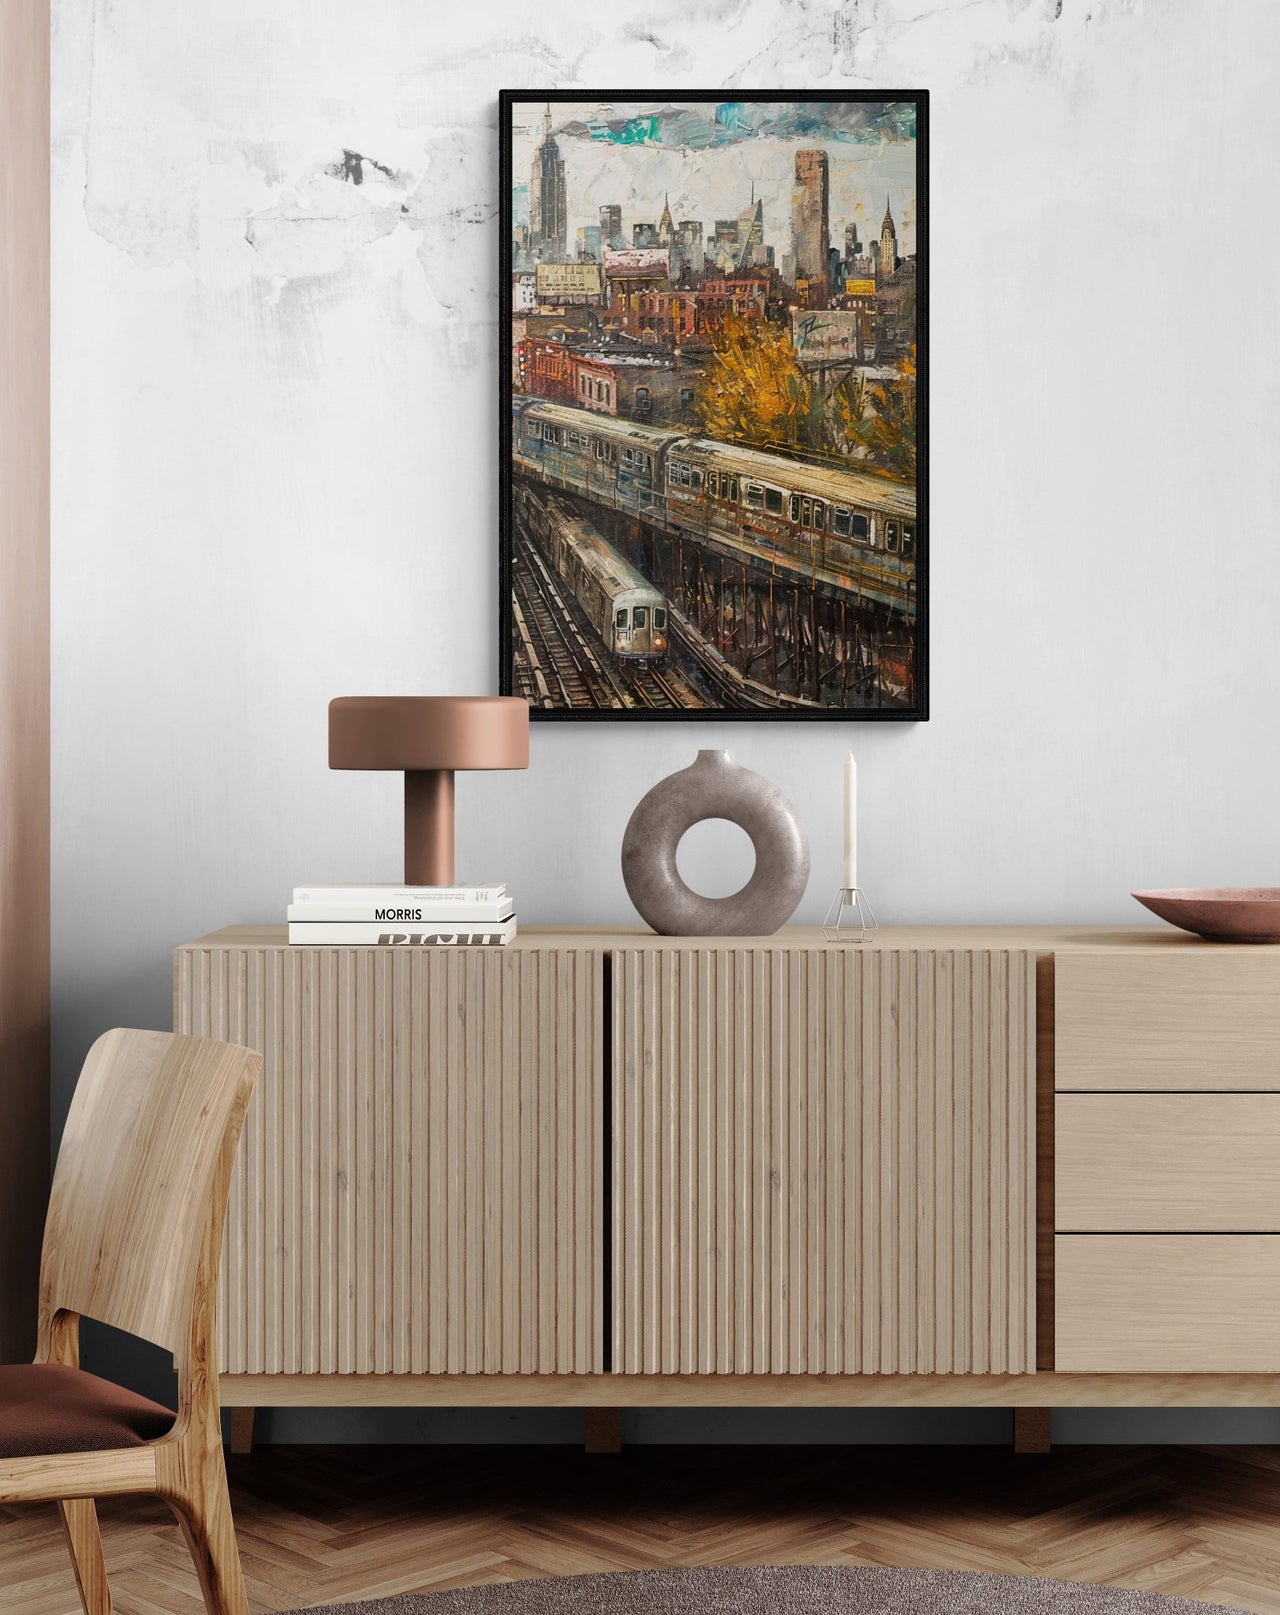 Urban landscape painting from Milton Wes Art, depicting a vibrant scene with a train crossing an overpass, set against a backdrop of historic buildings under a clear blue sky, enhancing the decor above a Scandinavian-style sideboard.